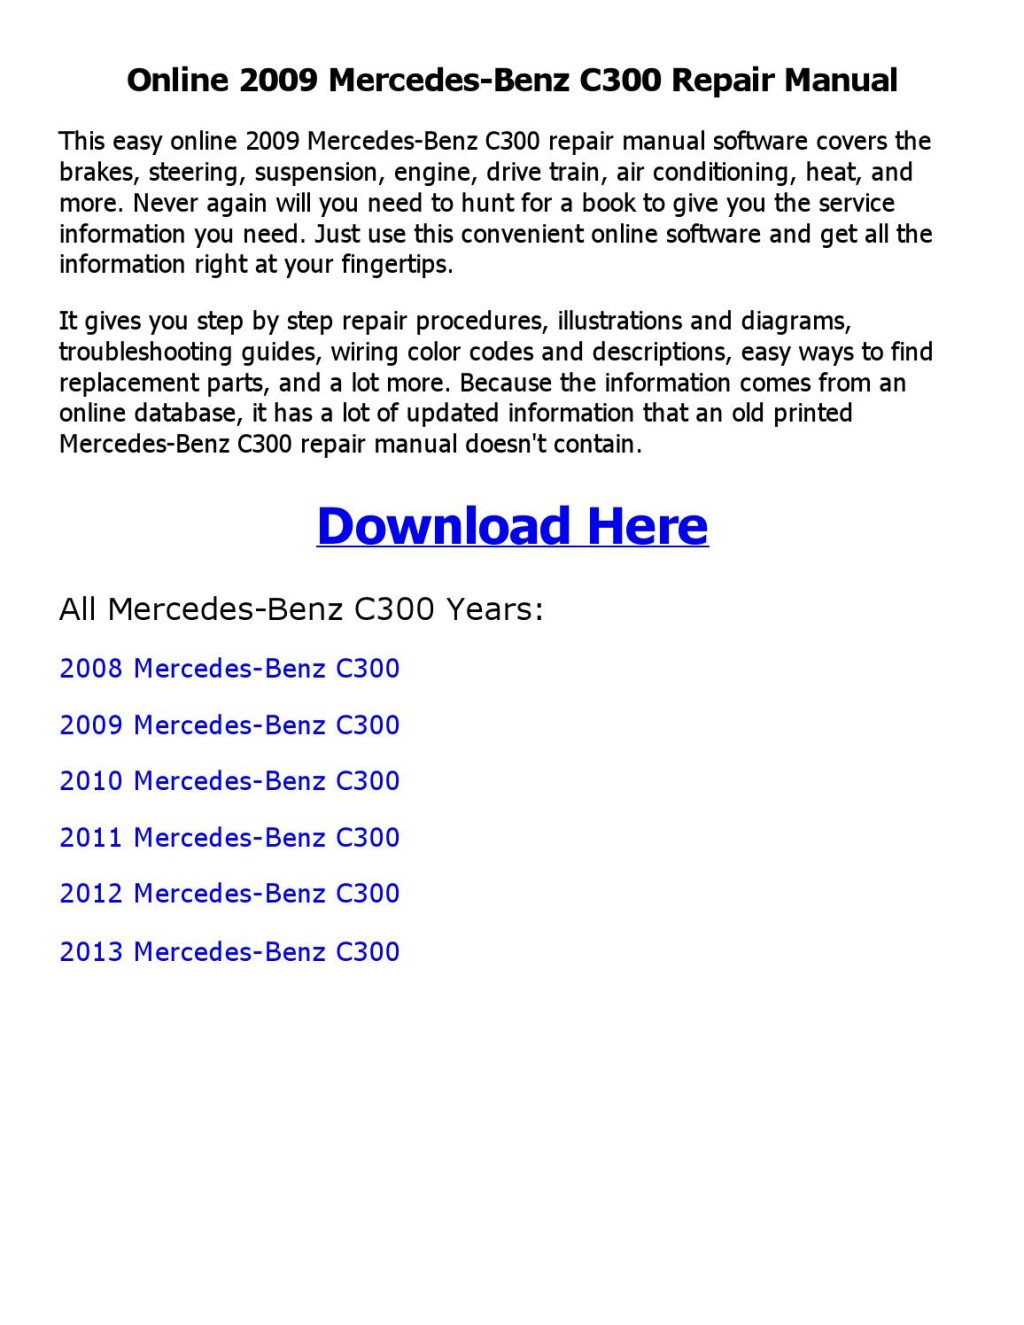 Picture of: mercedes benz c repair manual online by Chaudhary – Issuu